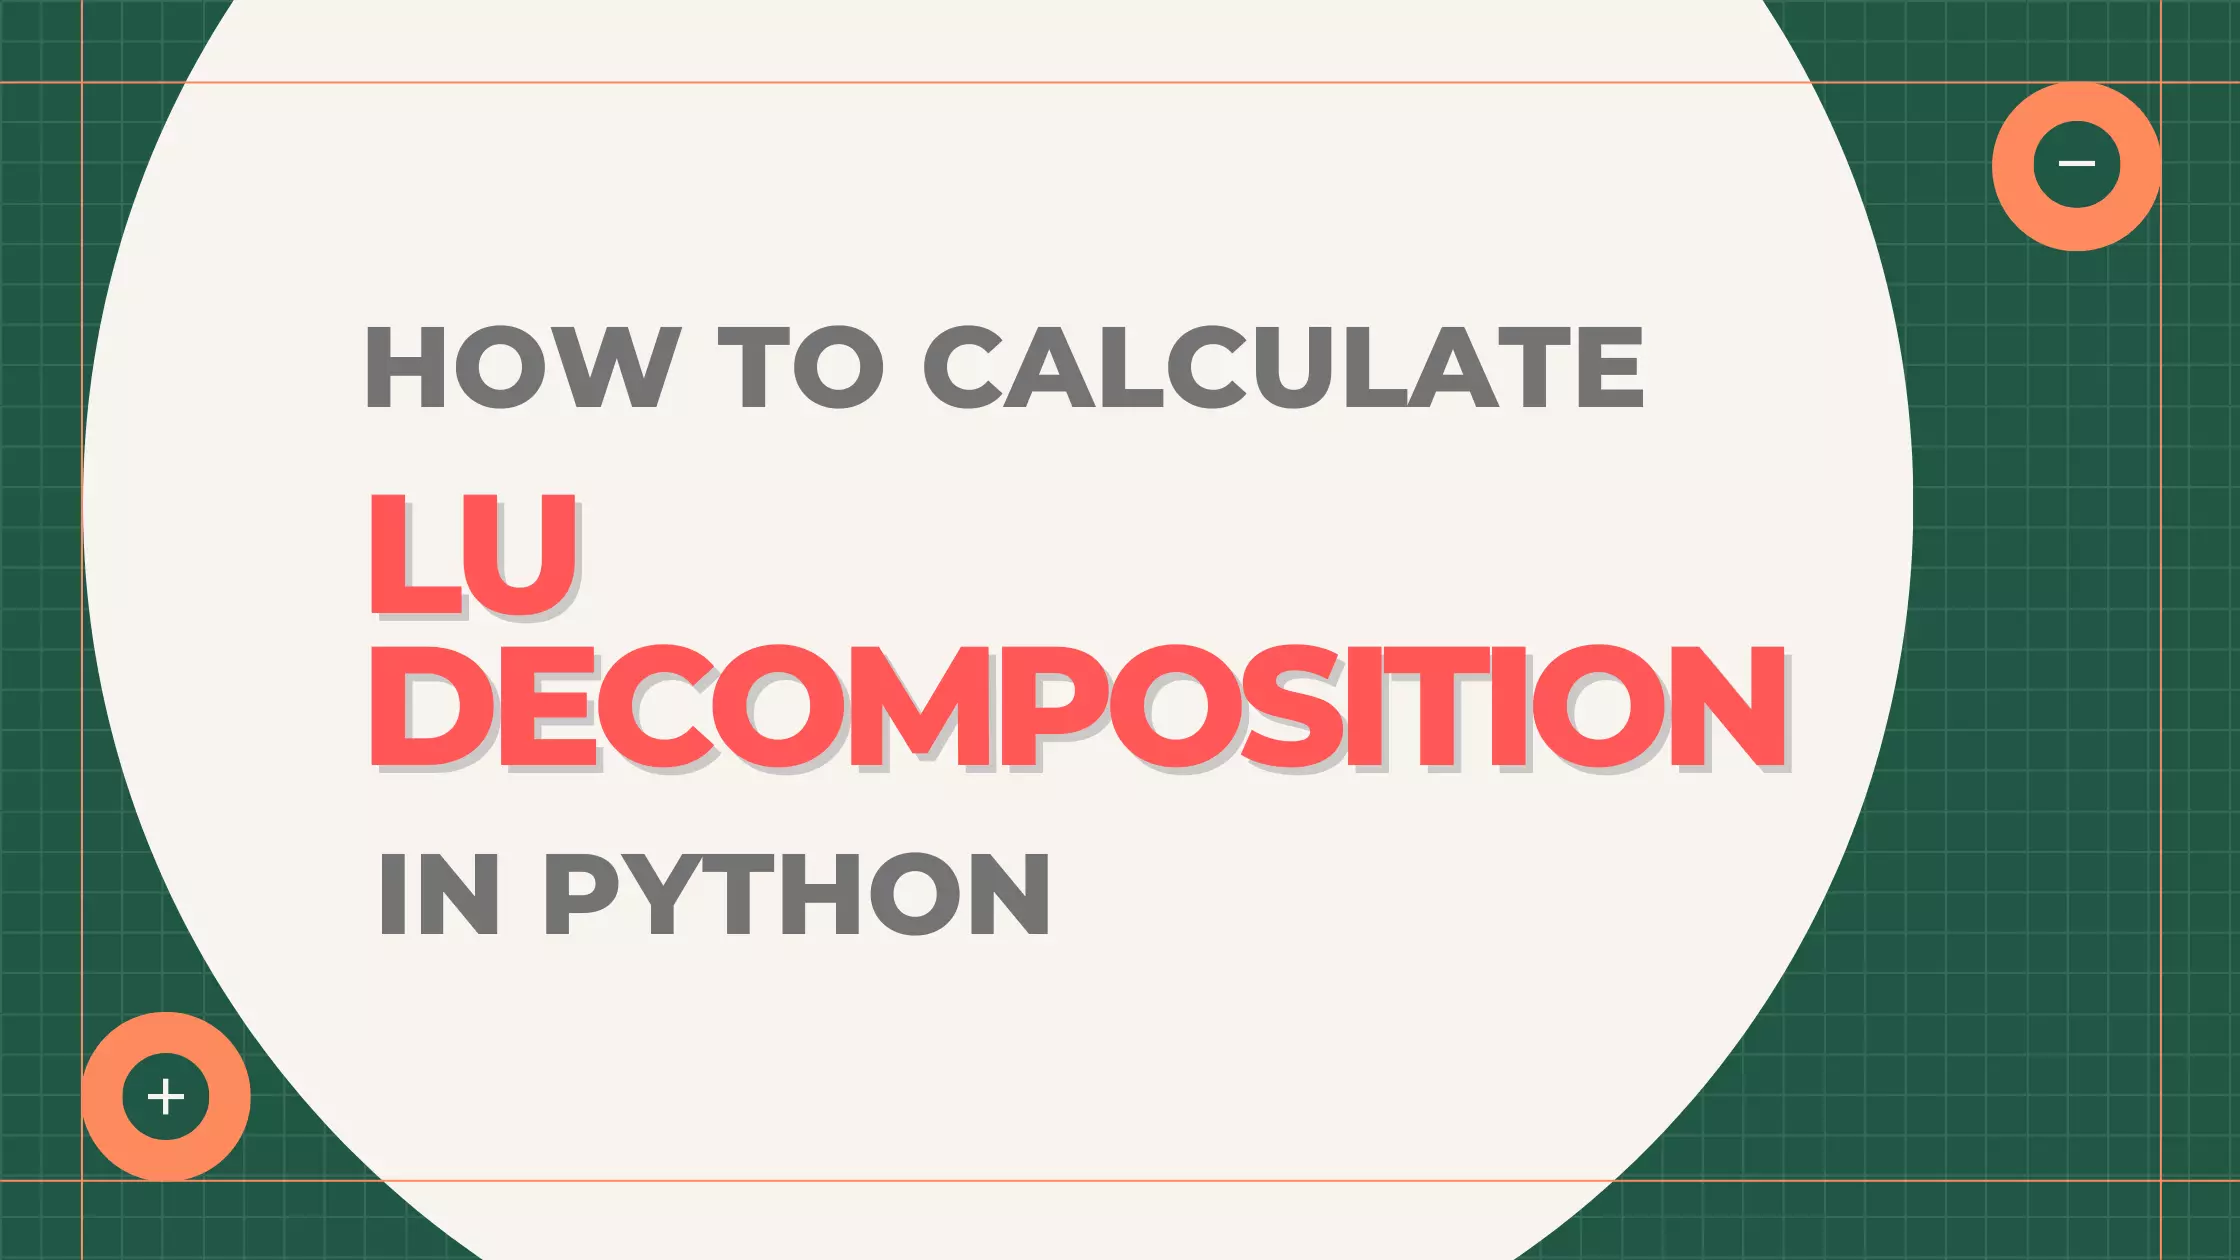 How to Calculate LU Decomposition in Python